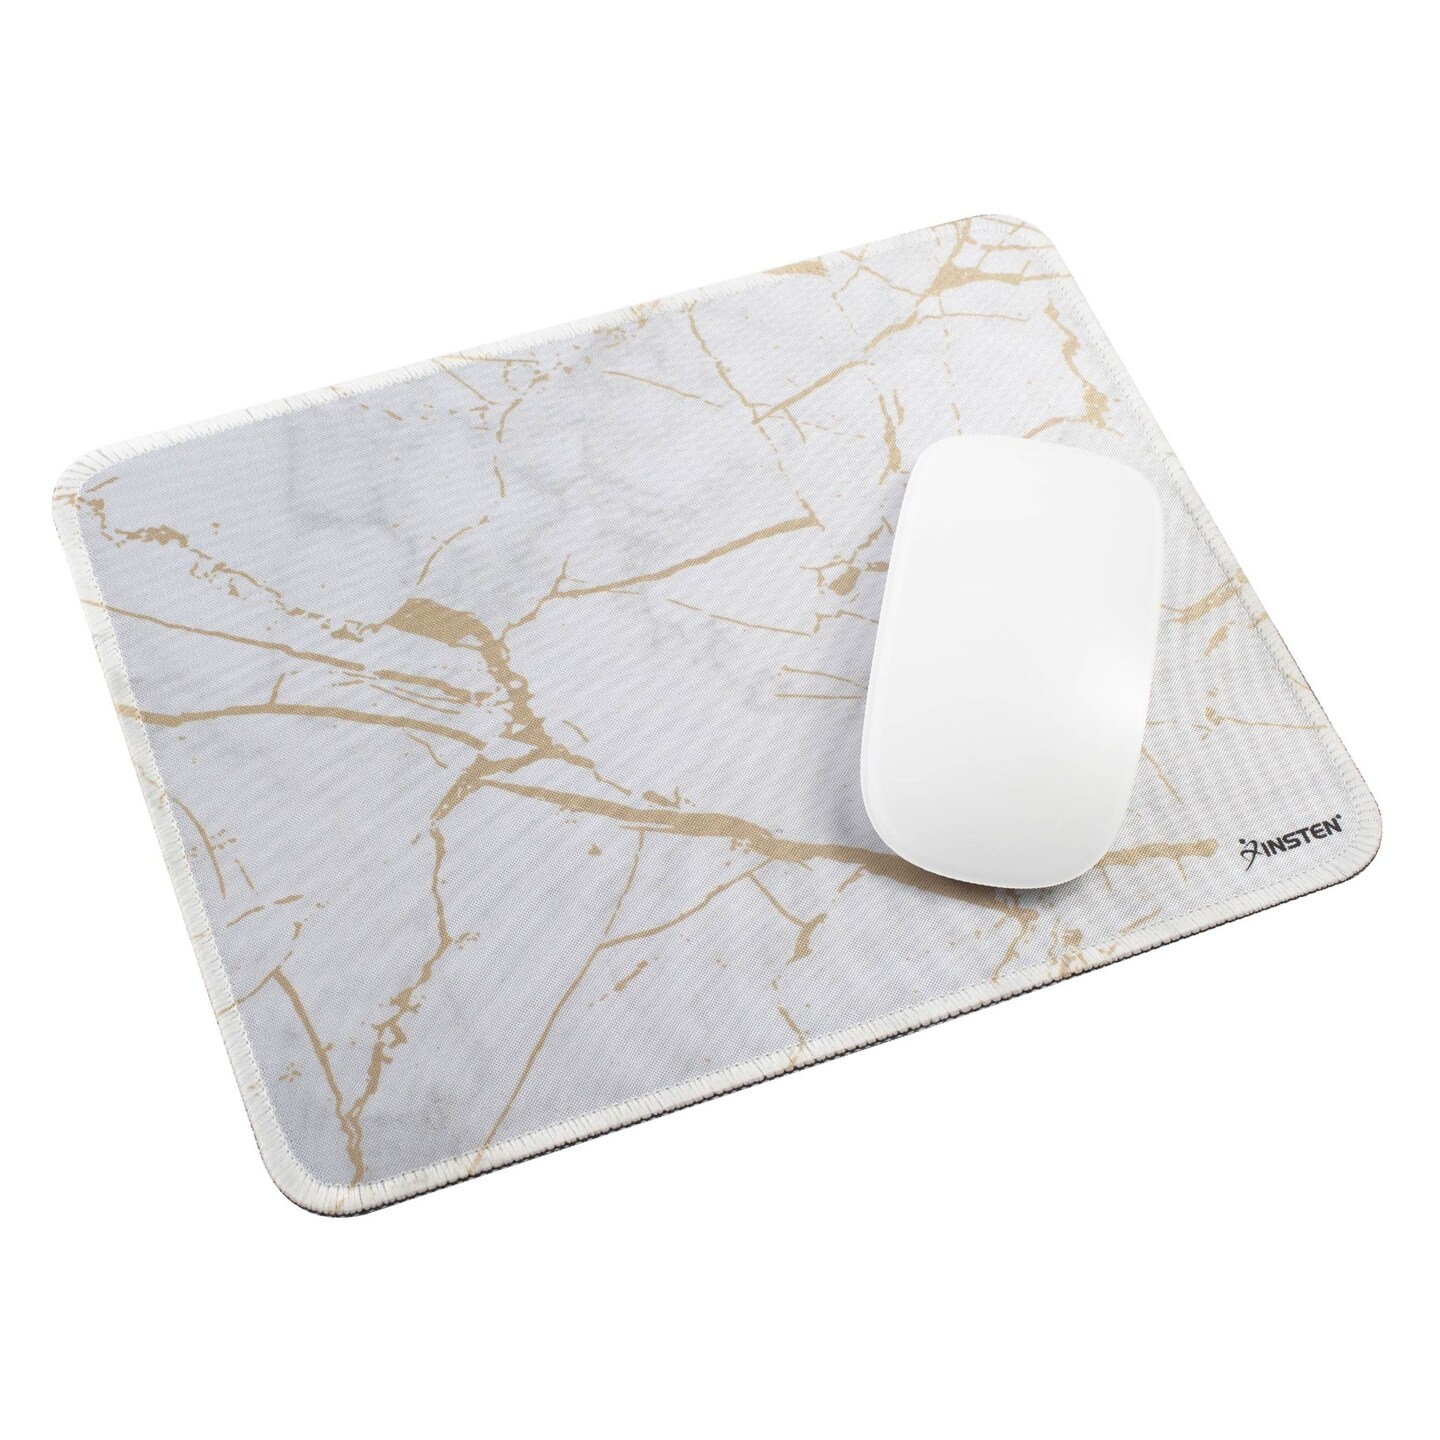 Insten Shiny Marble Gaming Mouse Pad with Stitched Edge, Water-Resistant, Non-Slip Rubber Base, White, 9.45 x 7.48 in